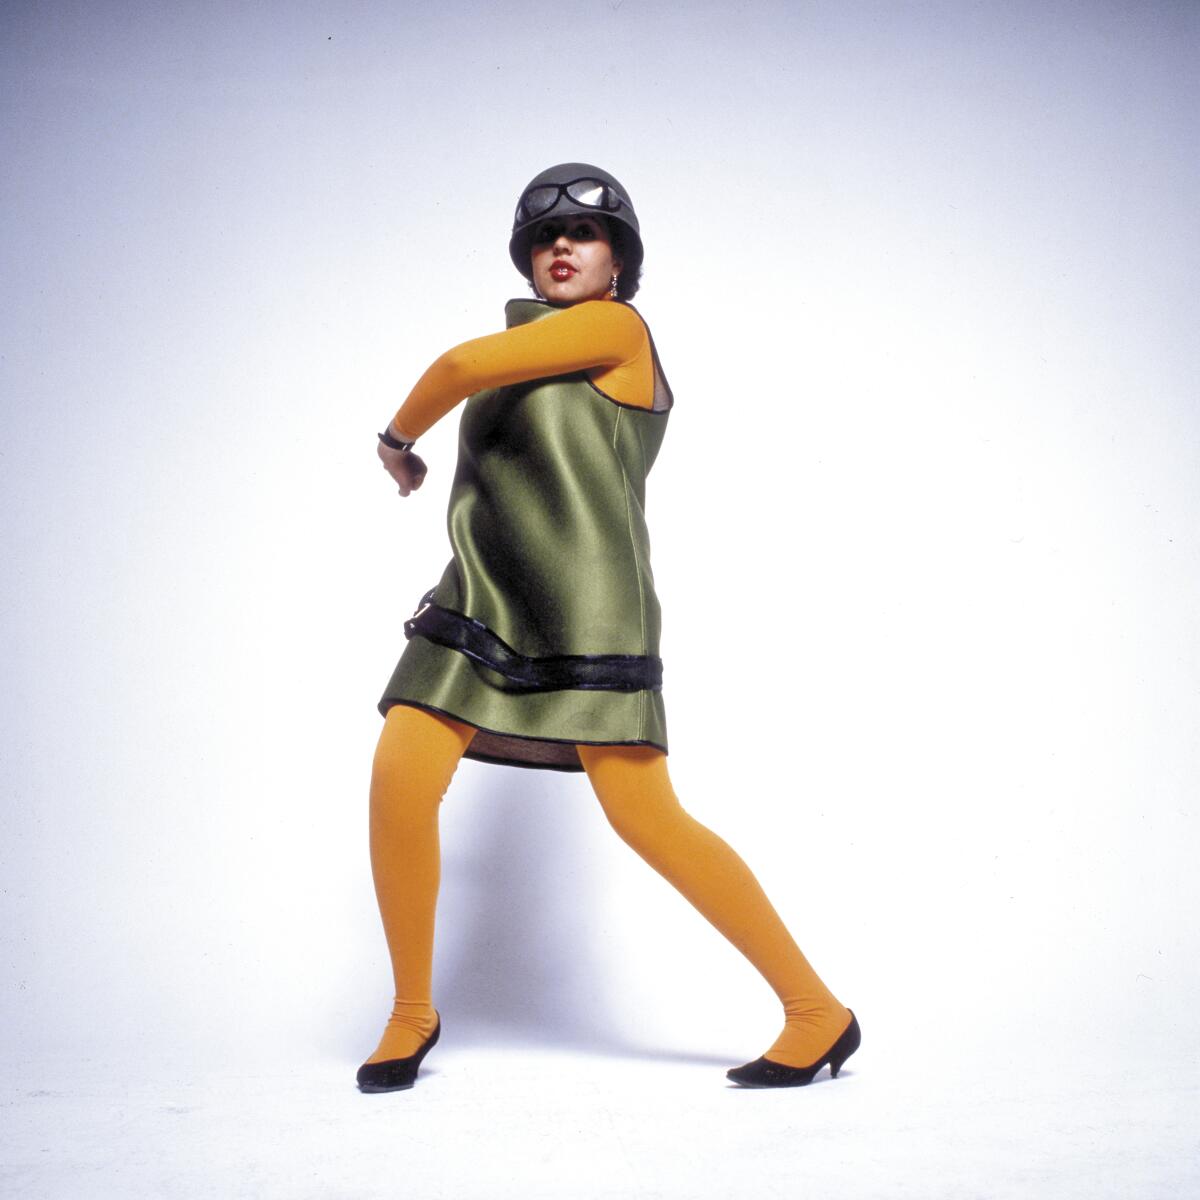 A woman in a green dress and yellow tights, wearing a helmet